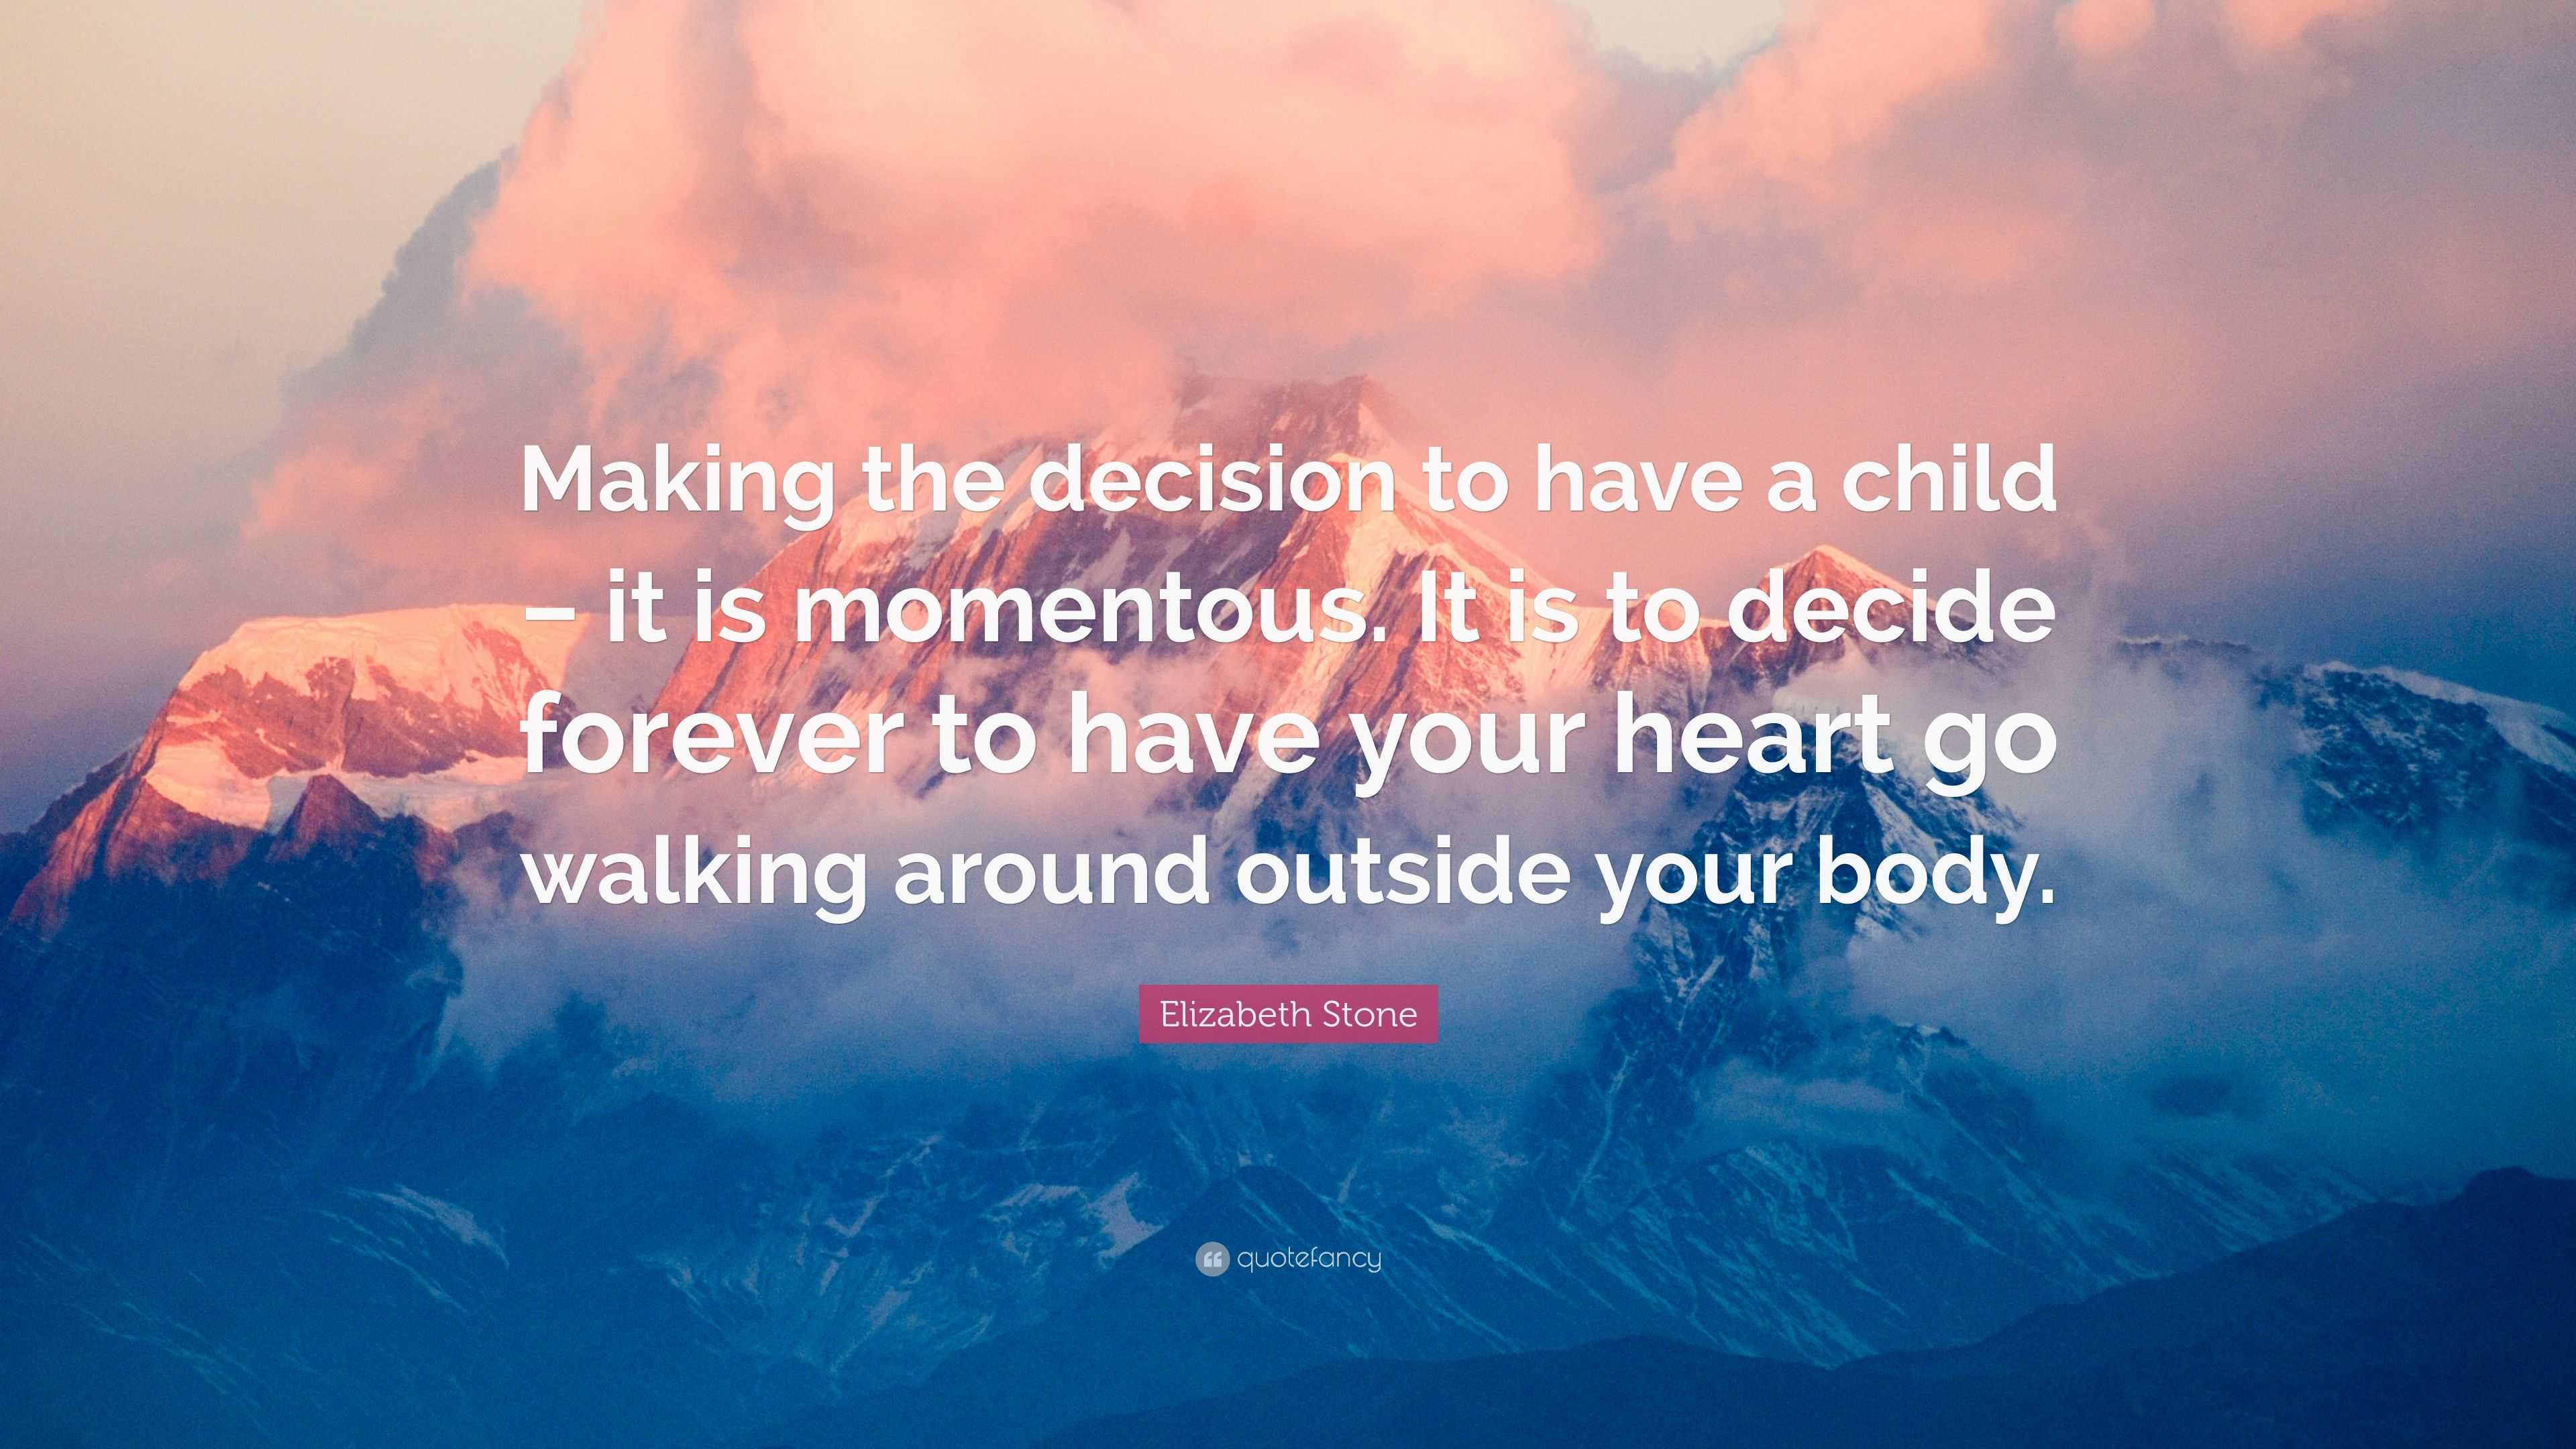 Elizabeth Stone Quote: "Making the decision to have a child - it is momentous. It is to decide ...